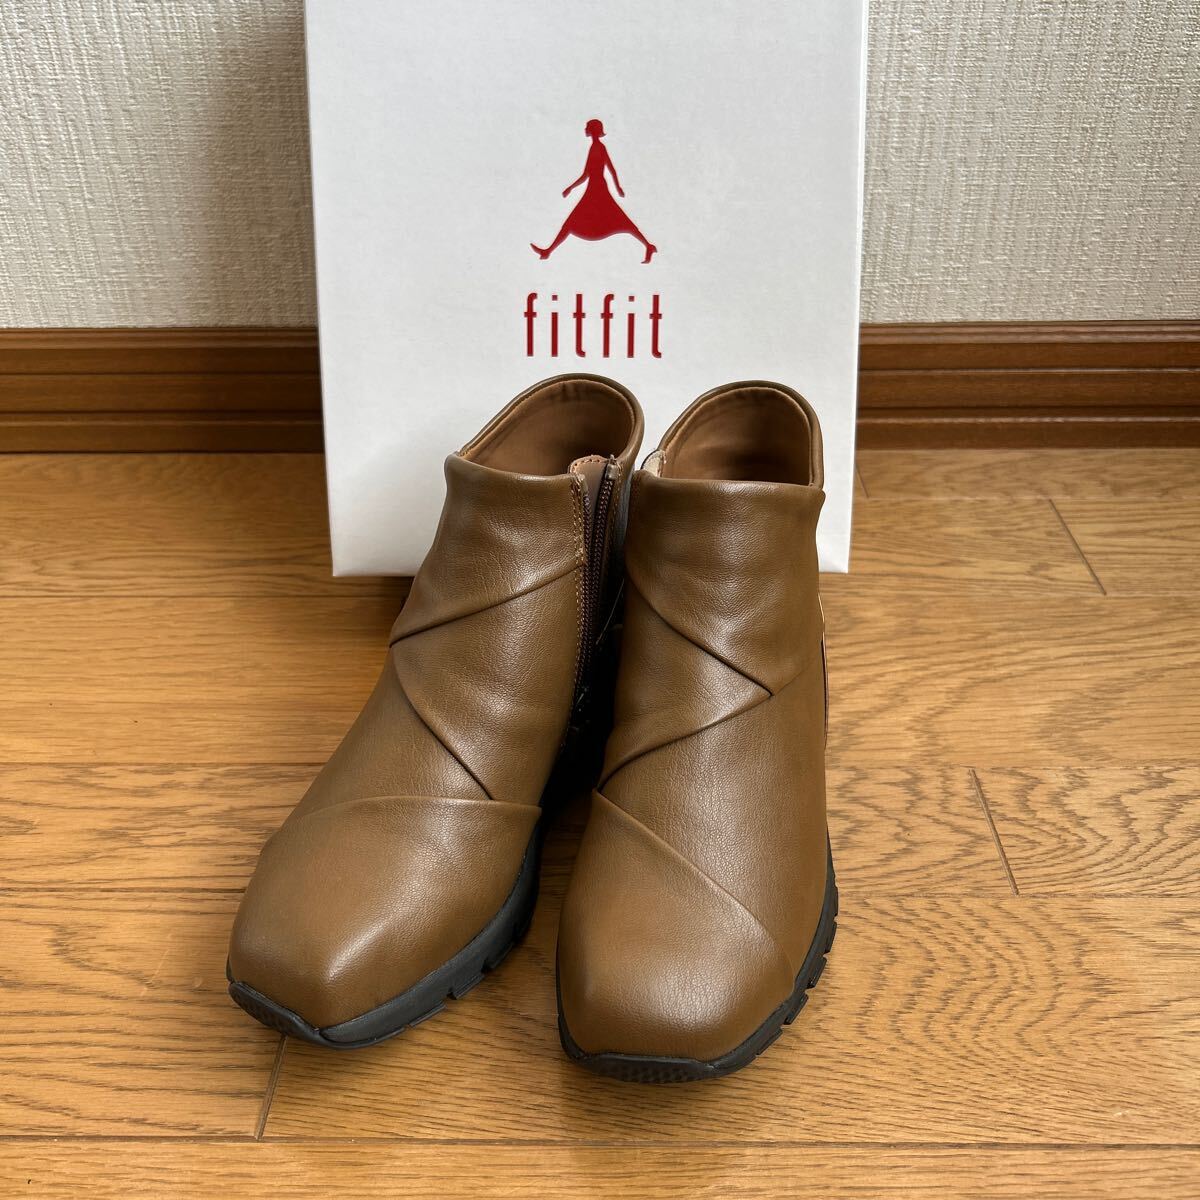 fitfit Fit Fit * Cross in step boots 23.0cm* regular price 11990 jpy * light brown * side hook and loop fastener soft body * short boots 